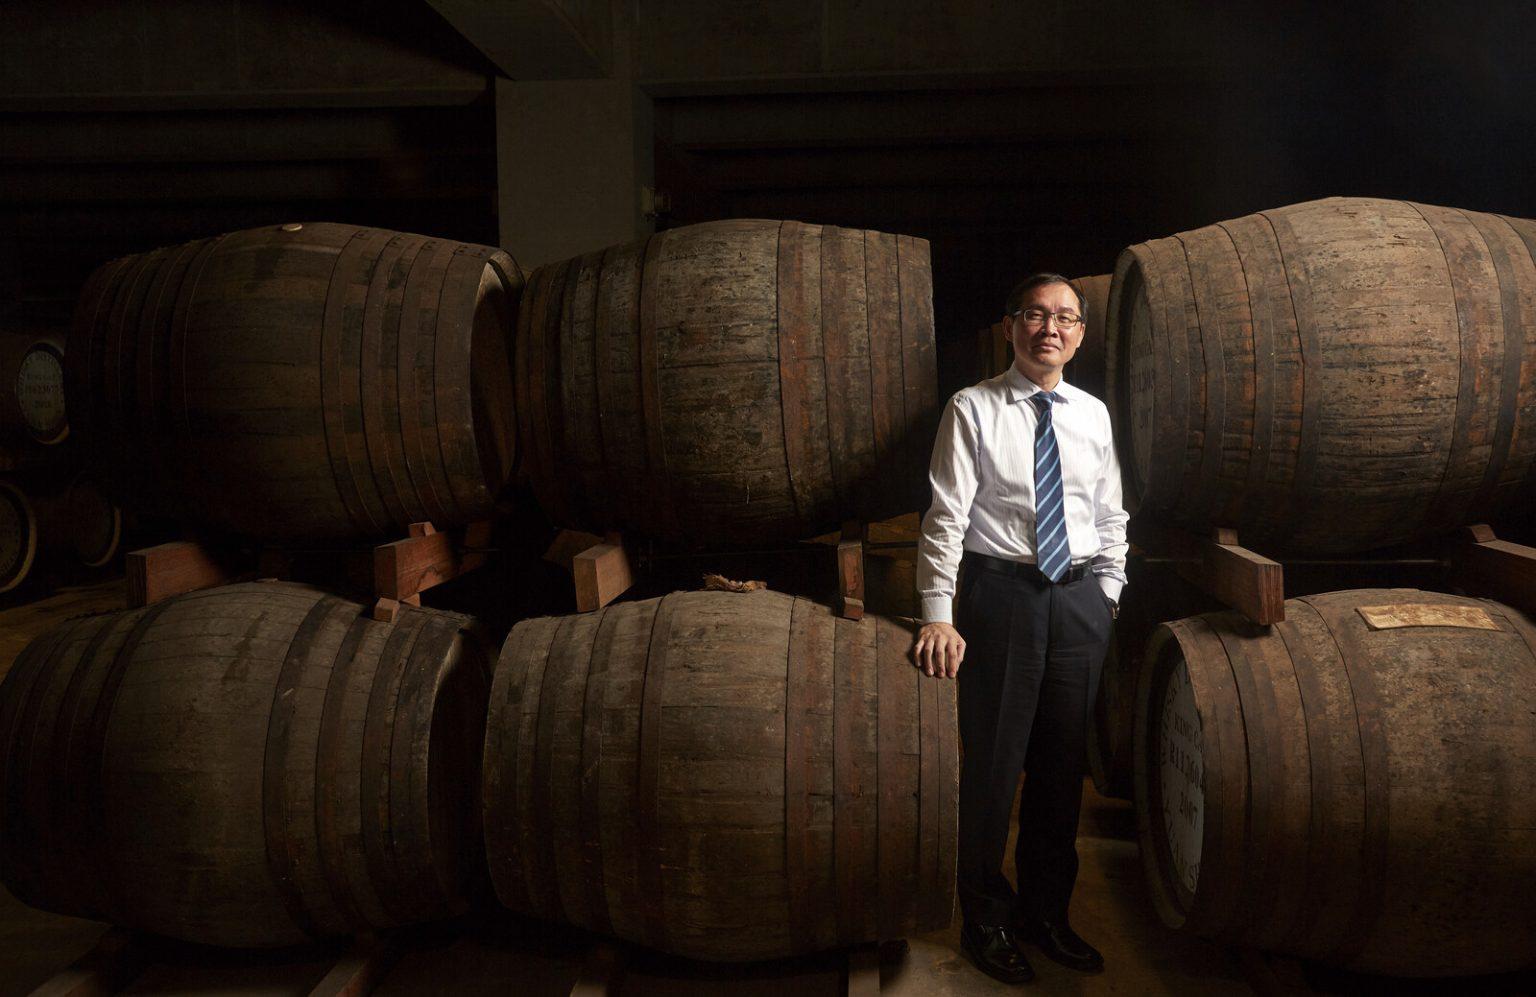 Lee Yu Ting, CEO of Kavalan, poses among whisky barrels in the warehouse area of the Kavalan distillery. By Craig Ferguson